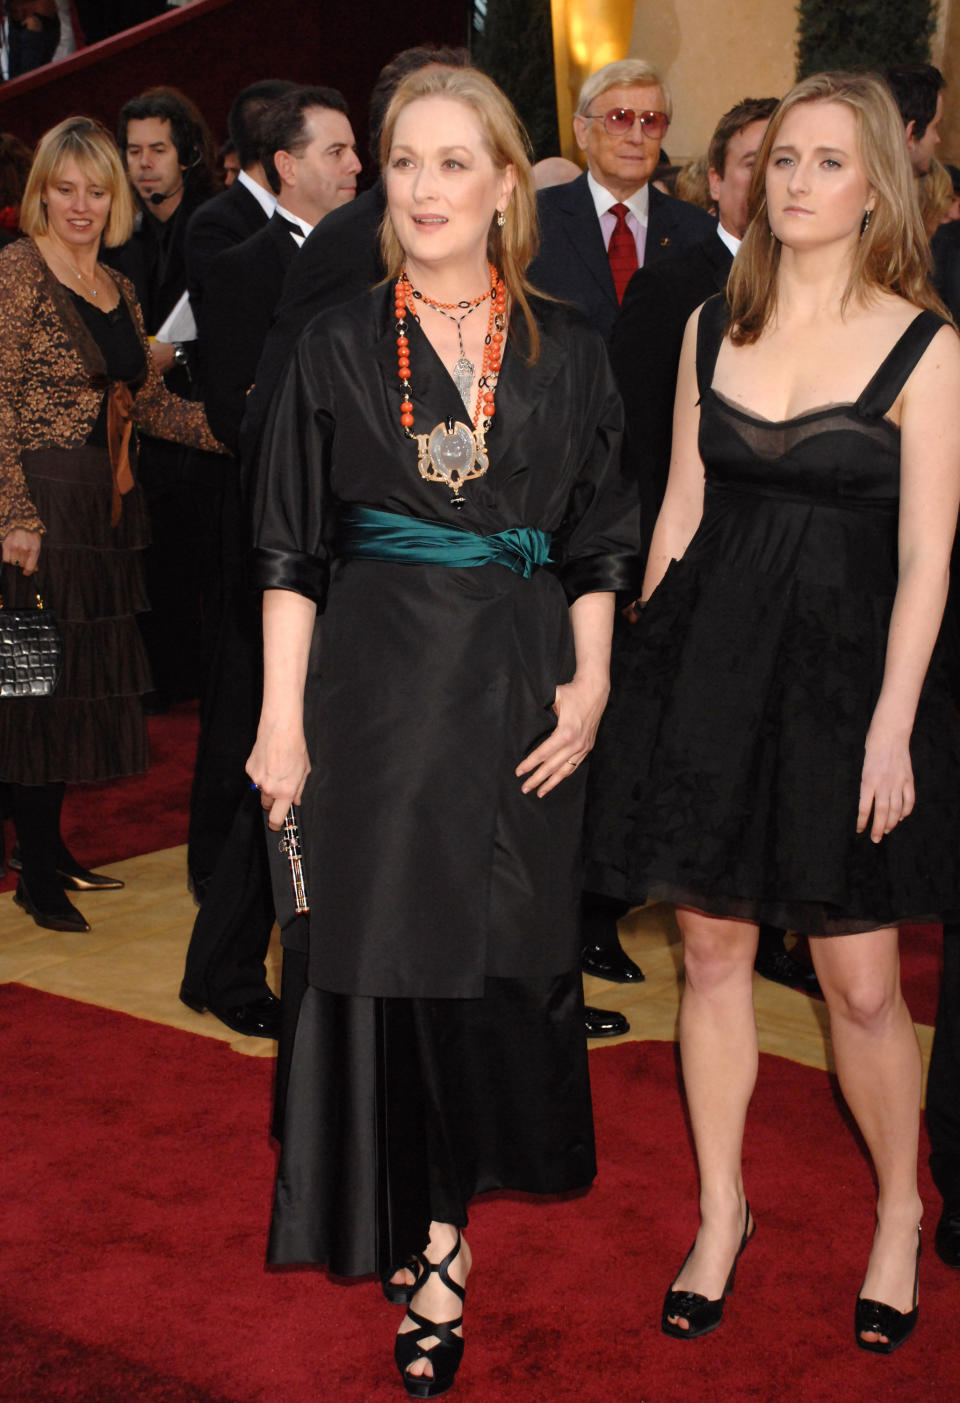 Streep, with daughter Grace Gummer, channeled her inner editrix for the 2007 Oscars ceremony, where she was nominated for her role as the icy Miranda Priestly in "The Devil Wears Prada."